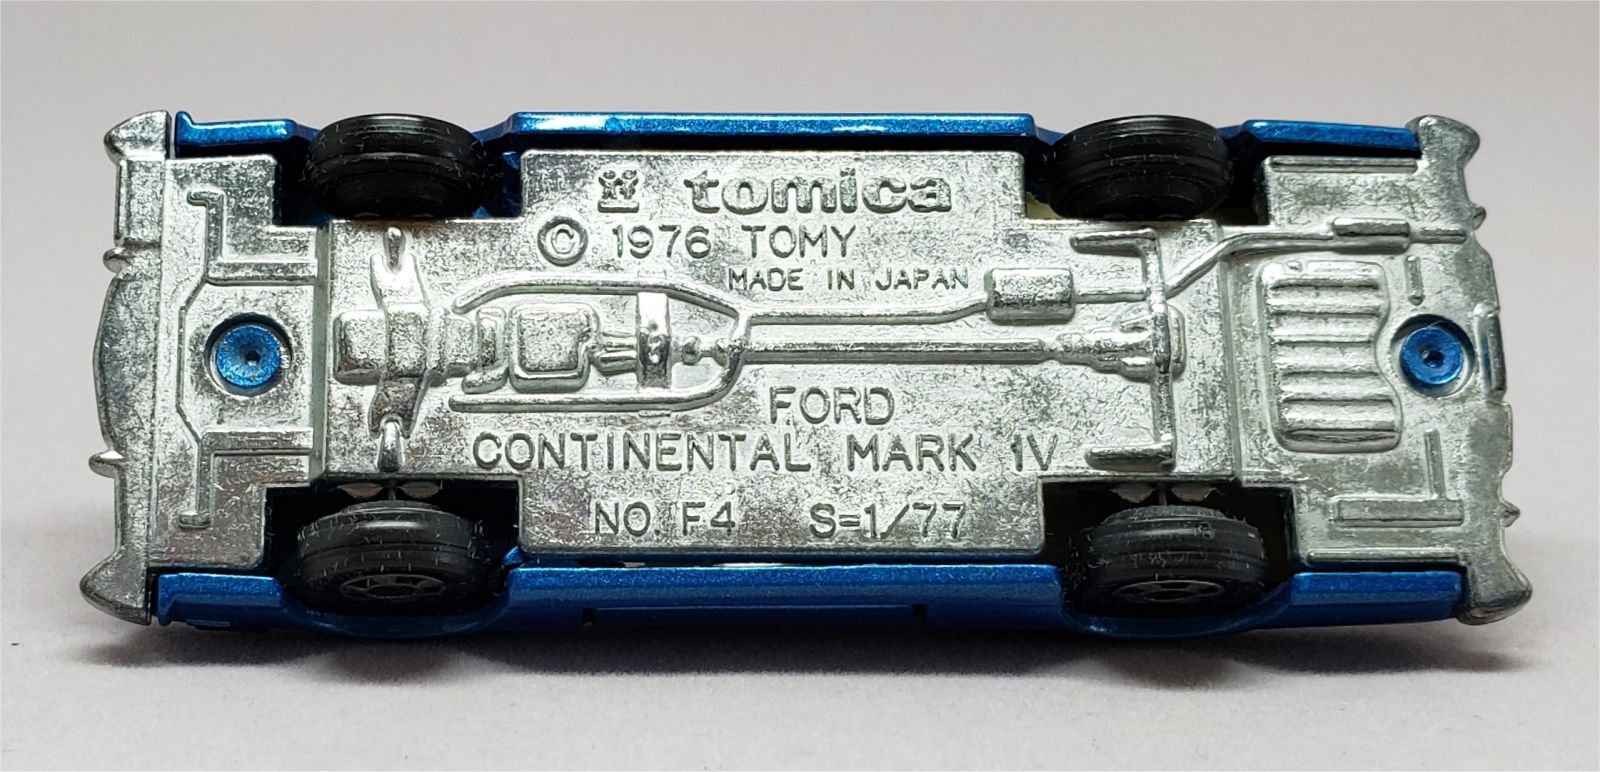 Illustration for article titled [REVIEW] Tomica Ford Continental Mark IV